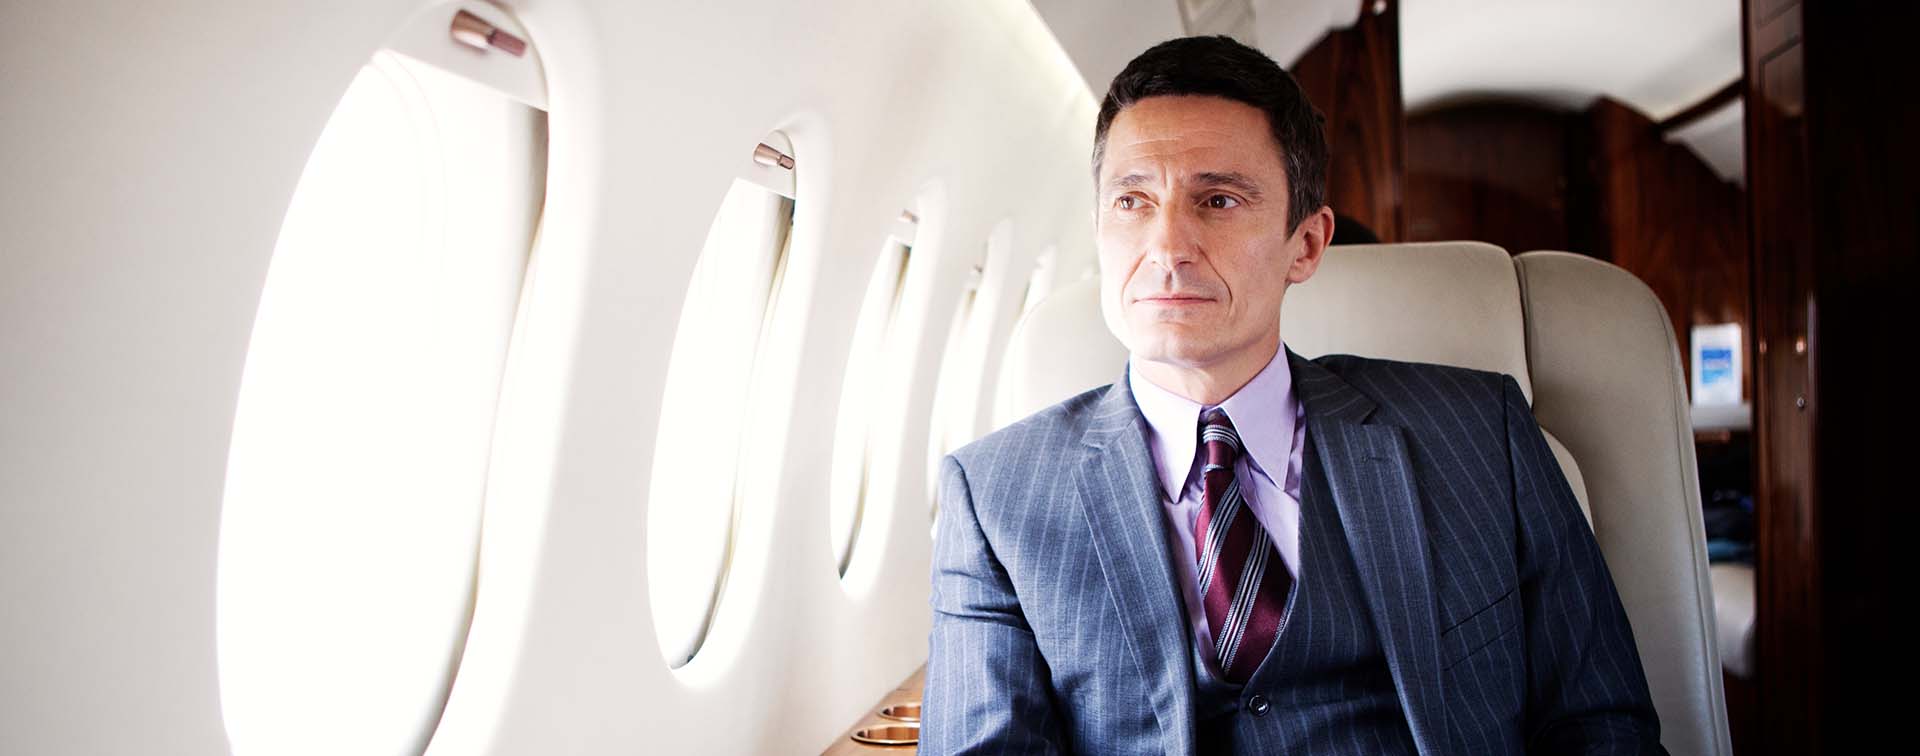 Caucasian business man sitting in a private airplane staring out the window